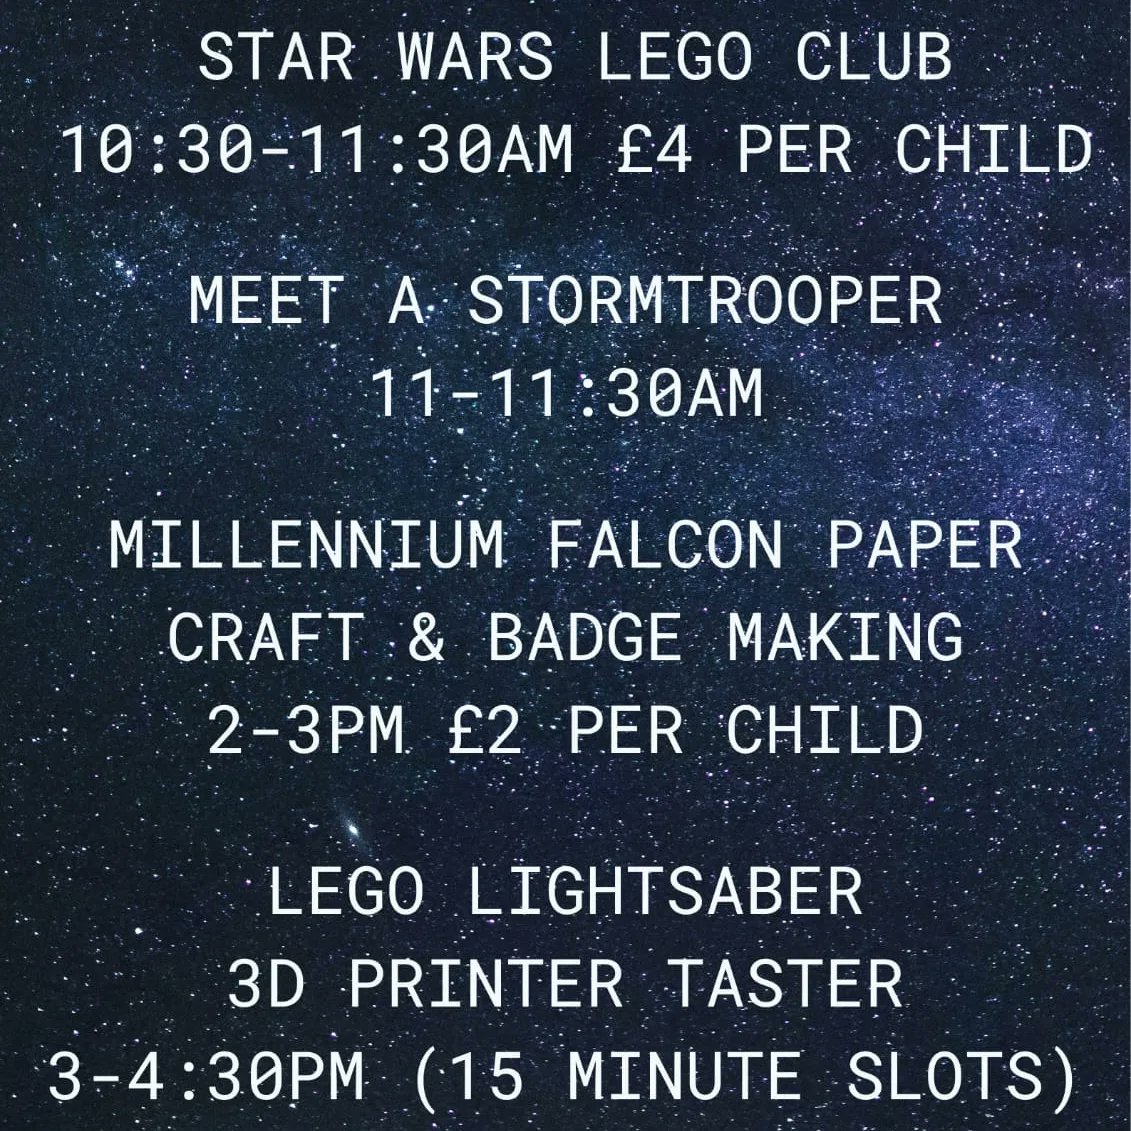 Not long now until MAY THE FOURTH!💥

On Saturday, pop over to @HitchinLibrary for a whole day of galactic activities - get in touch with them for booking availability, or just come along and join in with the fun! 

#MayThe4th #Hitchin #MayTheFourthBeWithYou #StarWarsDay @hertscc